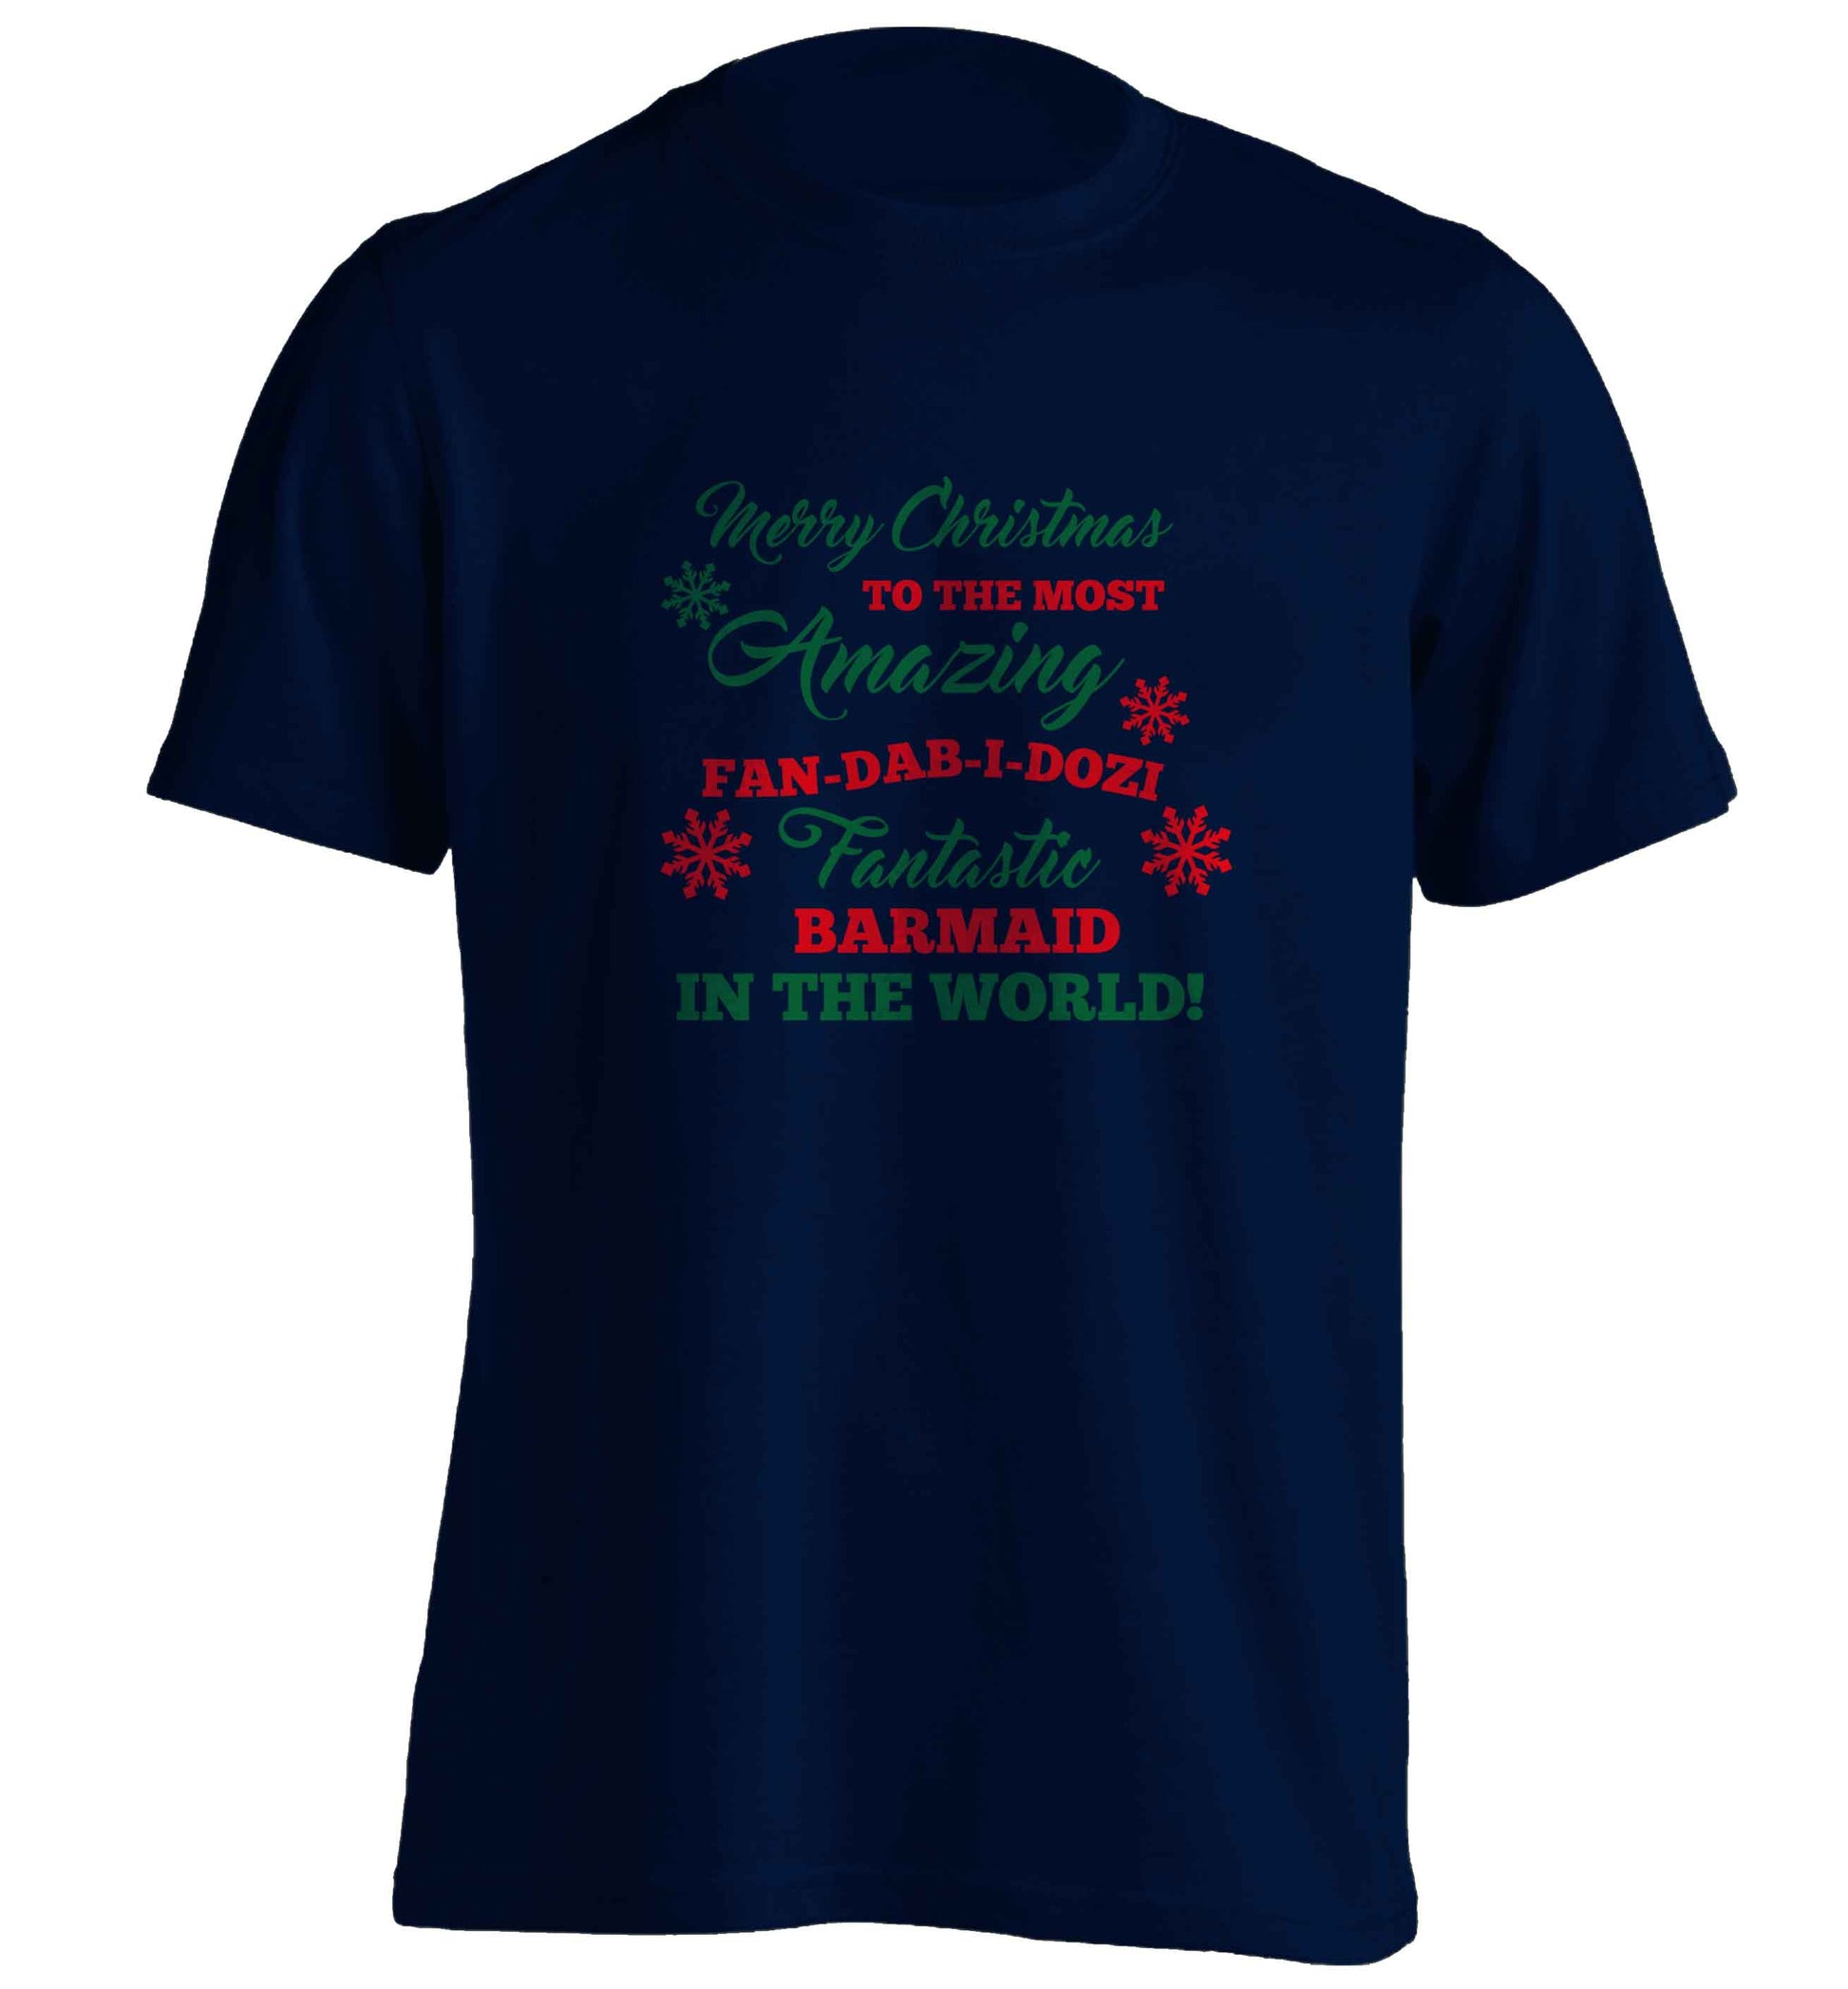 Merry Christmas to the most amazing barmaid in the world! adults unisex navy Tshirt 2XL